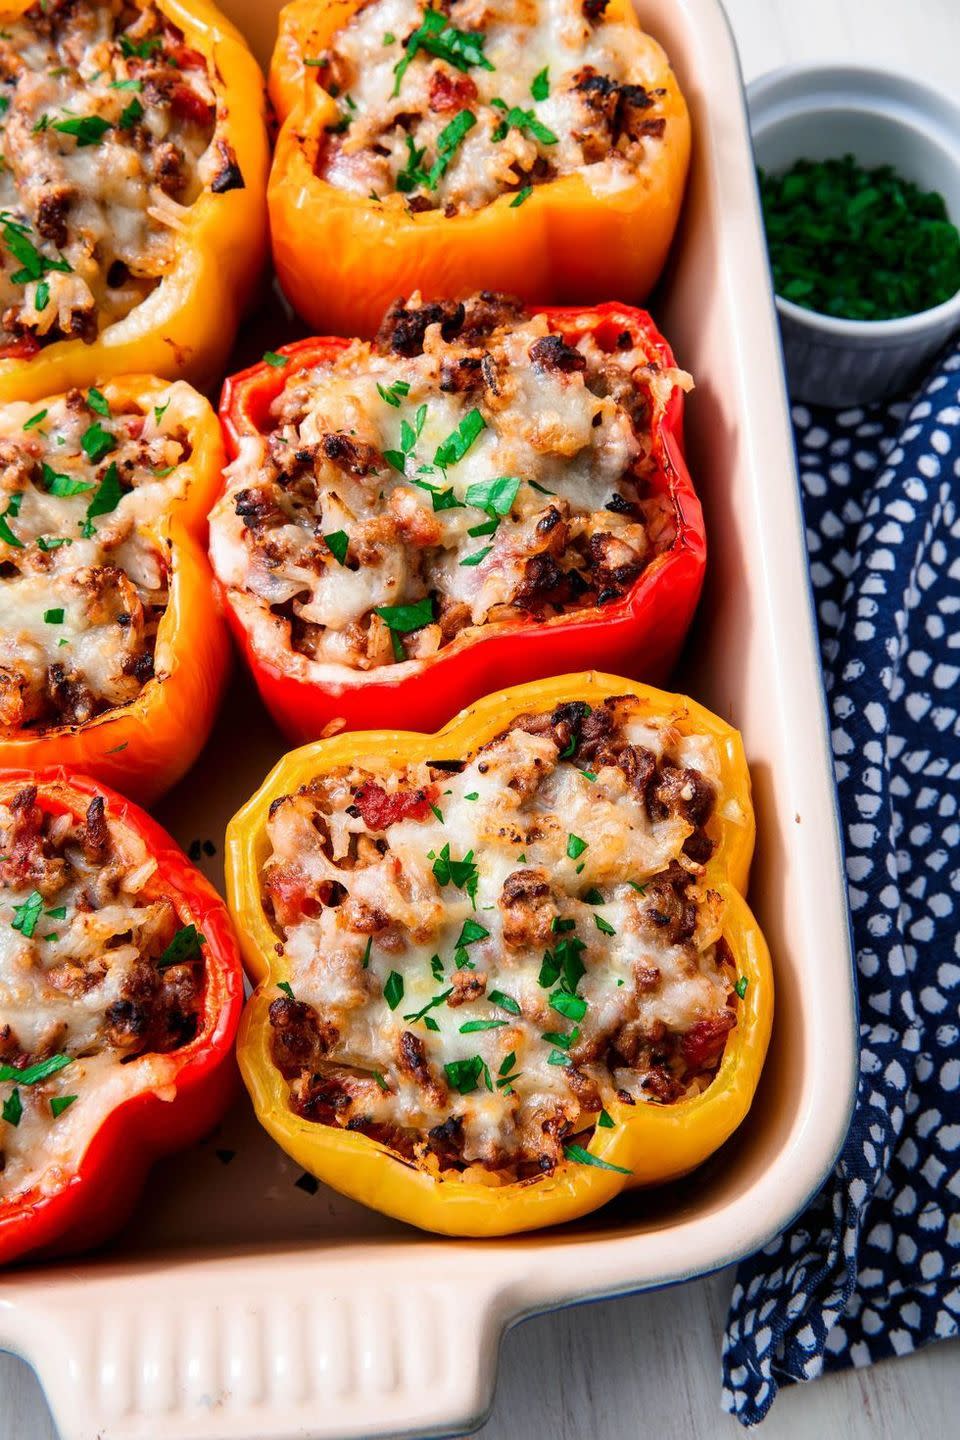 <p>We've loved stuffed peppers since we first laid eyes on them. This is our classic recipe—once you master them start experimenting with our <a href="https://www.delish.com/uk/cooking/recipes/a29794695/cheesesteak-stuffed-peppers-recipe/" rel="nofollow noopener" target="_blank" data-ylk="slk:Cheesesteak" class="link rapid-noclick-resp">Cheesesteak</a> and <a href="https://www.delish.com/uk/cooking/a29123703/chicken-parm-stuffed-peppers-recipe/" rel="nofollow noopener" target="_blank" data-ylk="slk:Chicken Parm" class="link rapid-noclick-resp">Chicken Parm</a> varieties.</p><p>Get the <a href="https://www.delish.com/uk/cooking/recipes/a31234335/classic-stuffed-peppers-recipe/" rel="nofollow noopener" target="_blank" data-ylk="slk:Classic Stuffed Peppers" class="link rapid-noclick-resp">Classic Stuffed Peppers</a> recipe.</p>